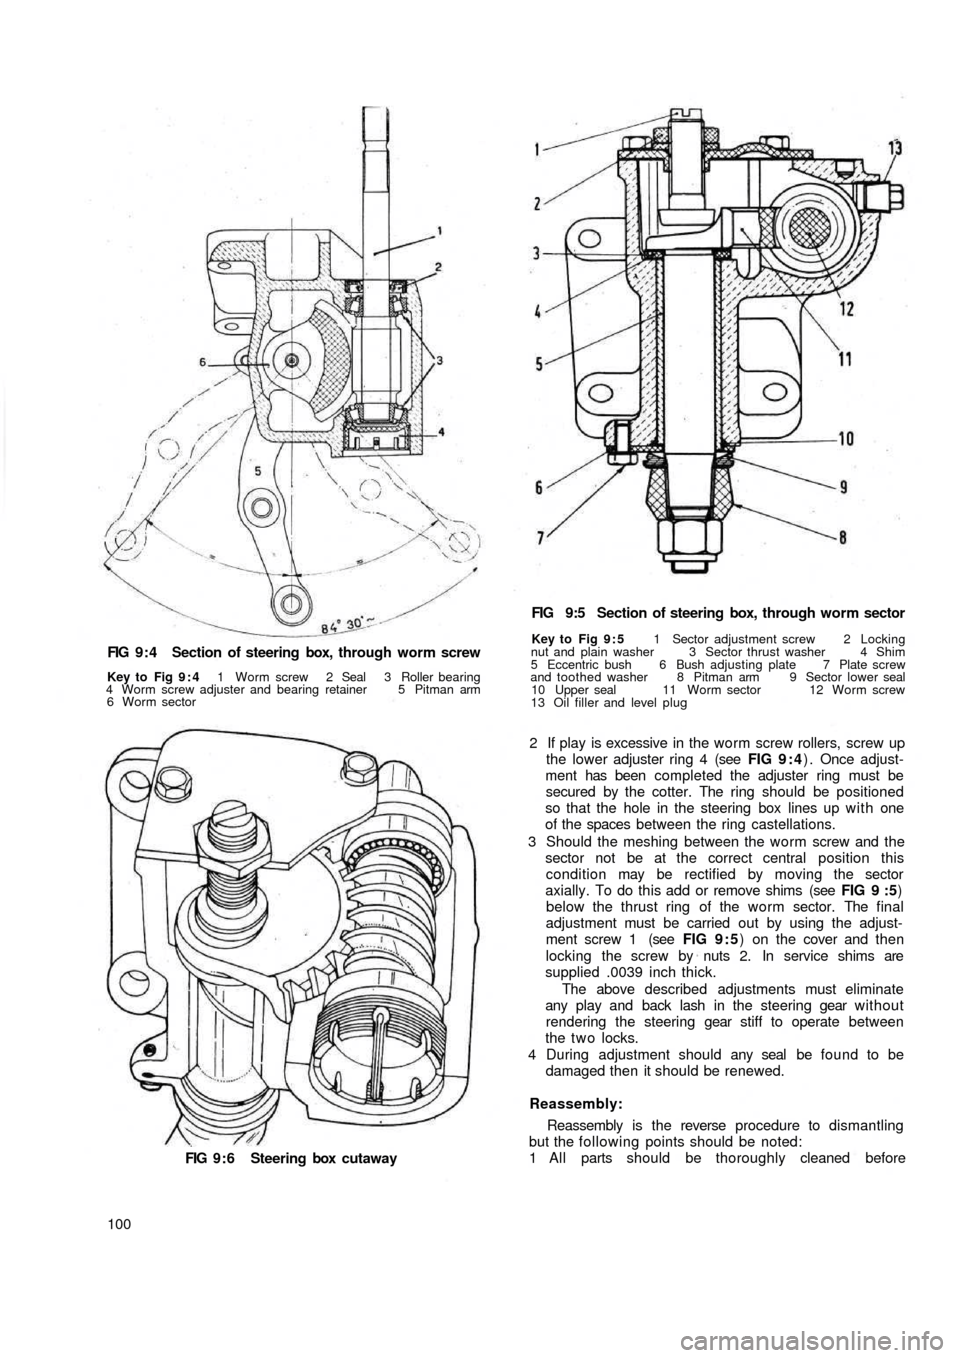 FIAT 500 1967 1.G Workshop Manual FIG 9 : 4  Section of steering box,  through worm screw
Key to  Fig 9 : 4 1 Worm screw 2 Seal 3 Roller bearing
4 Worm screw adjuster and bearing retainer 5 Pitman arm
6 Worm sector
FIG 9 : 6  Steering